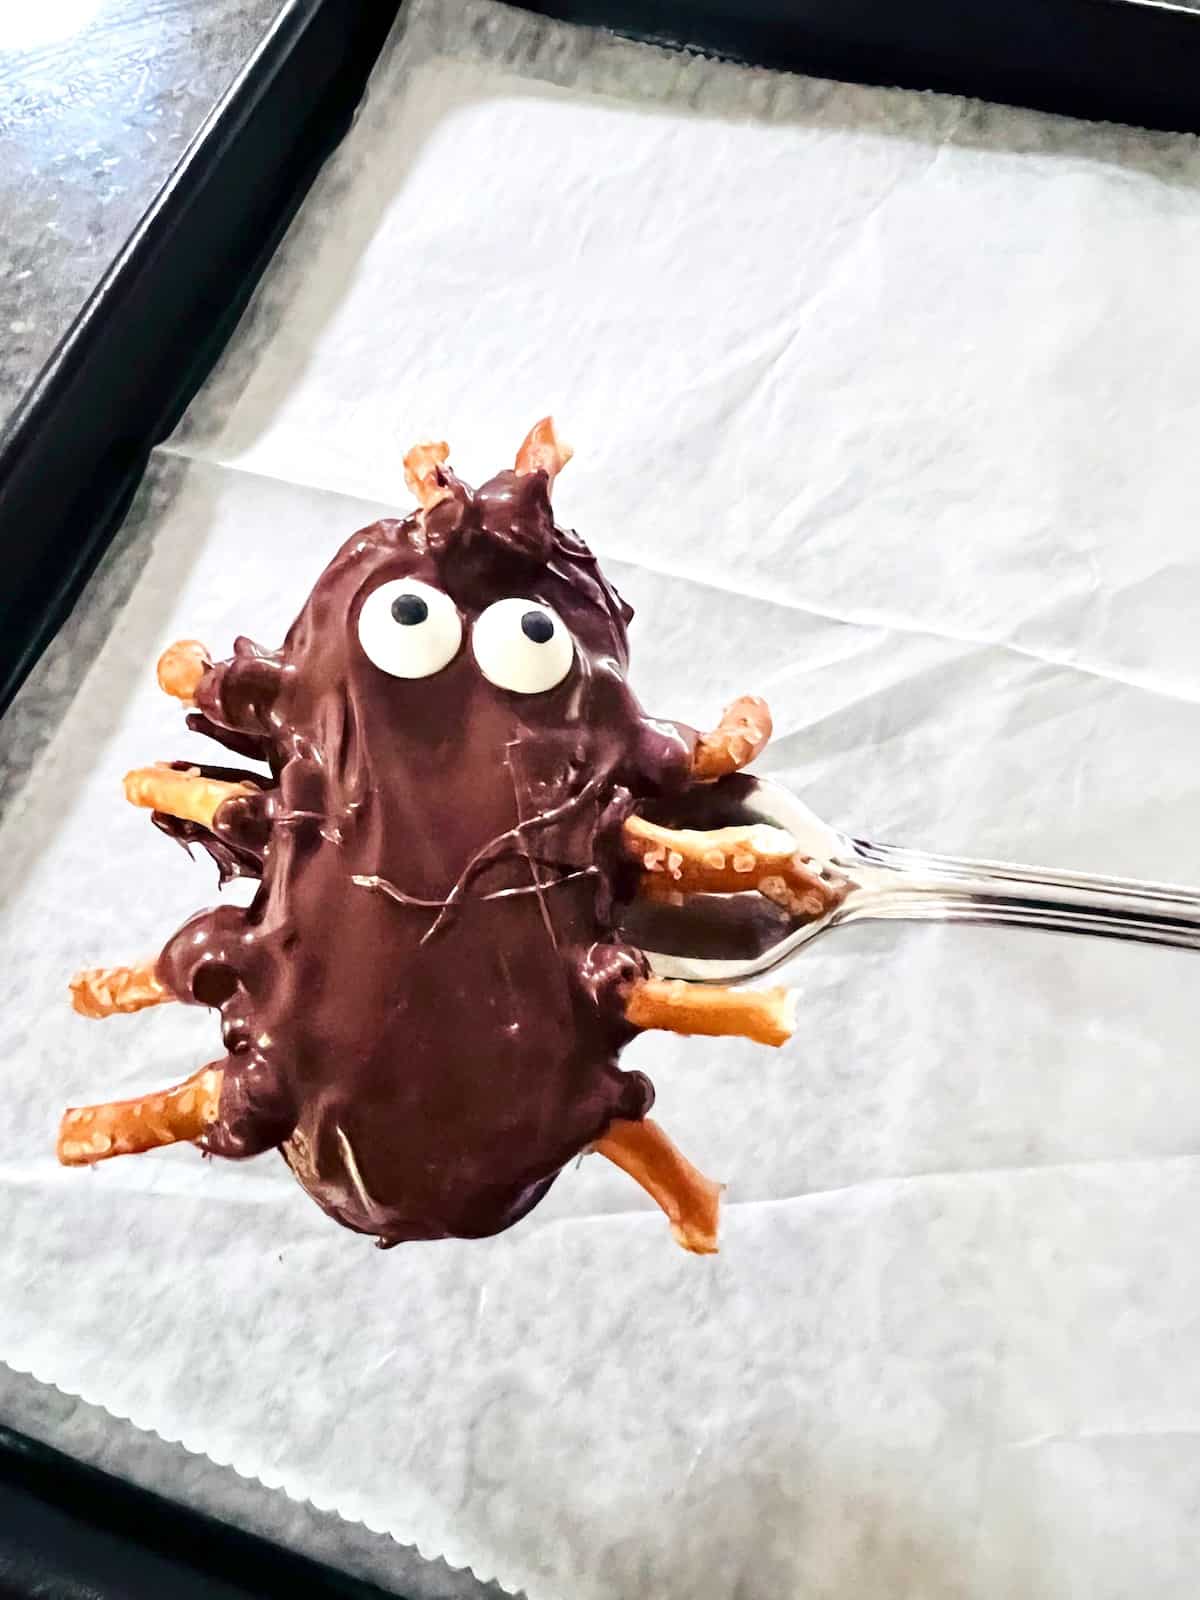 Fork holding a cookie dipped in chocolate with all the pretzel legs and antennae attached plus candy eyes.